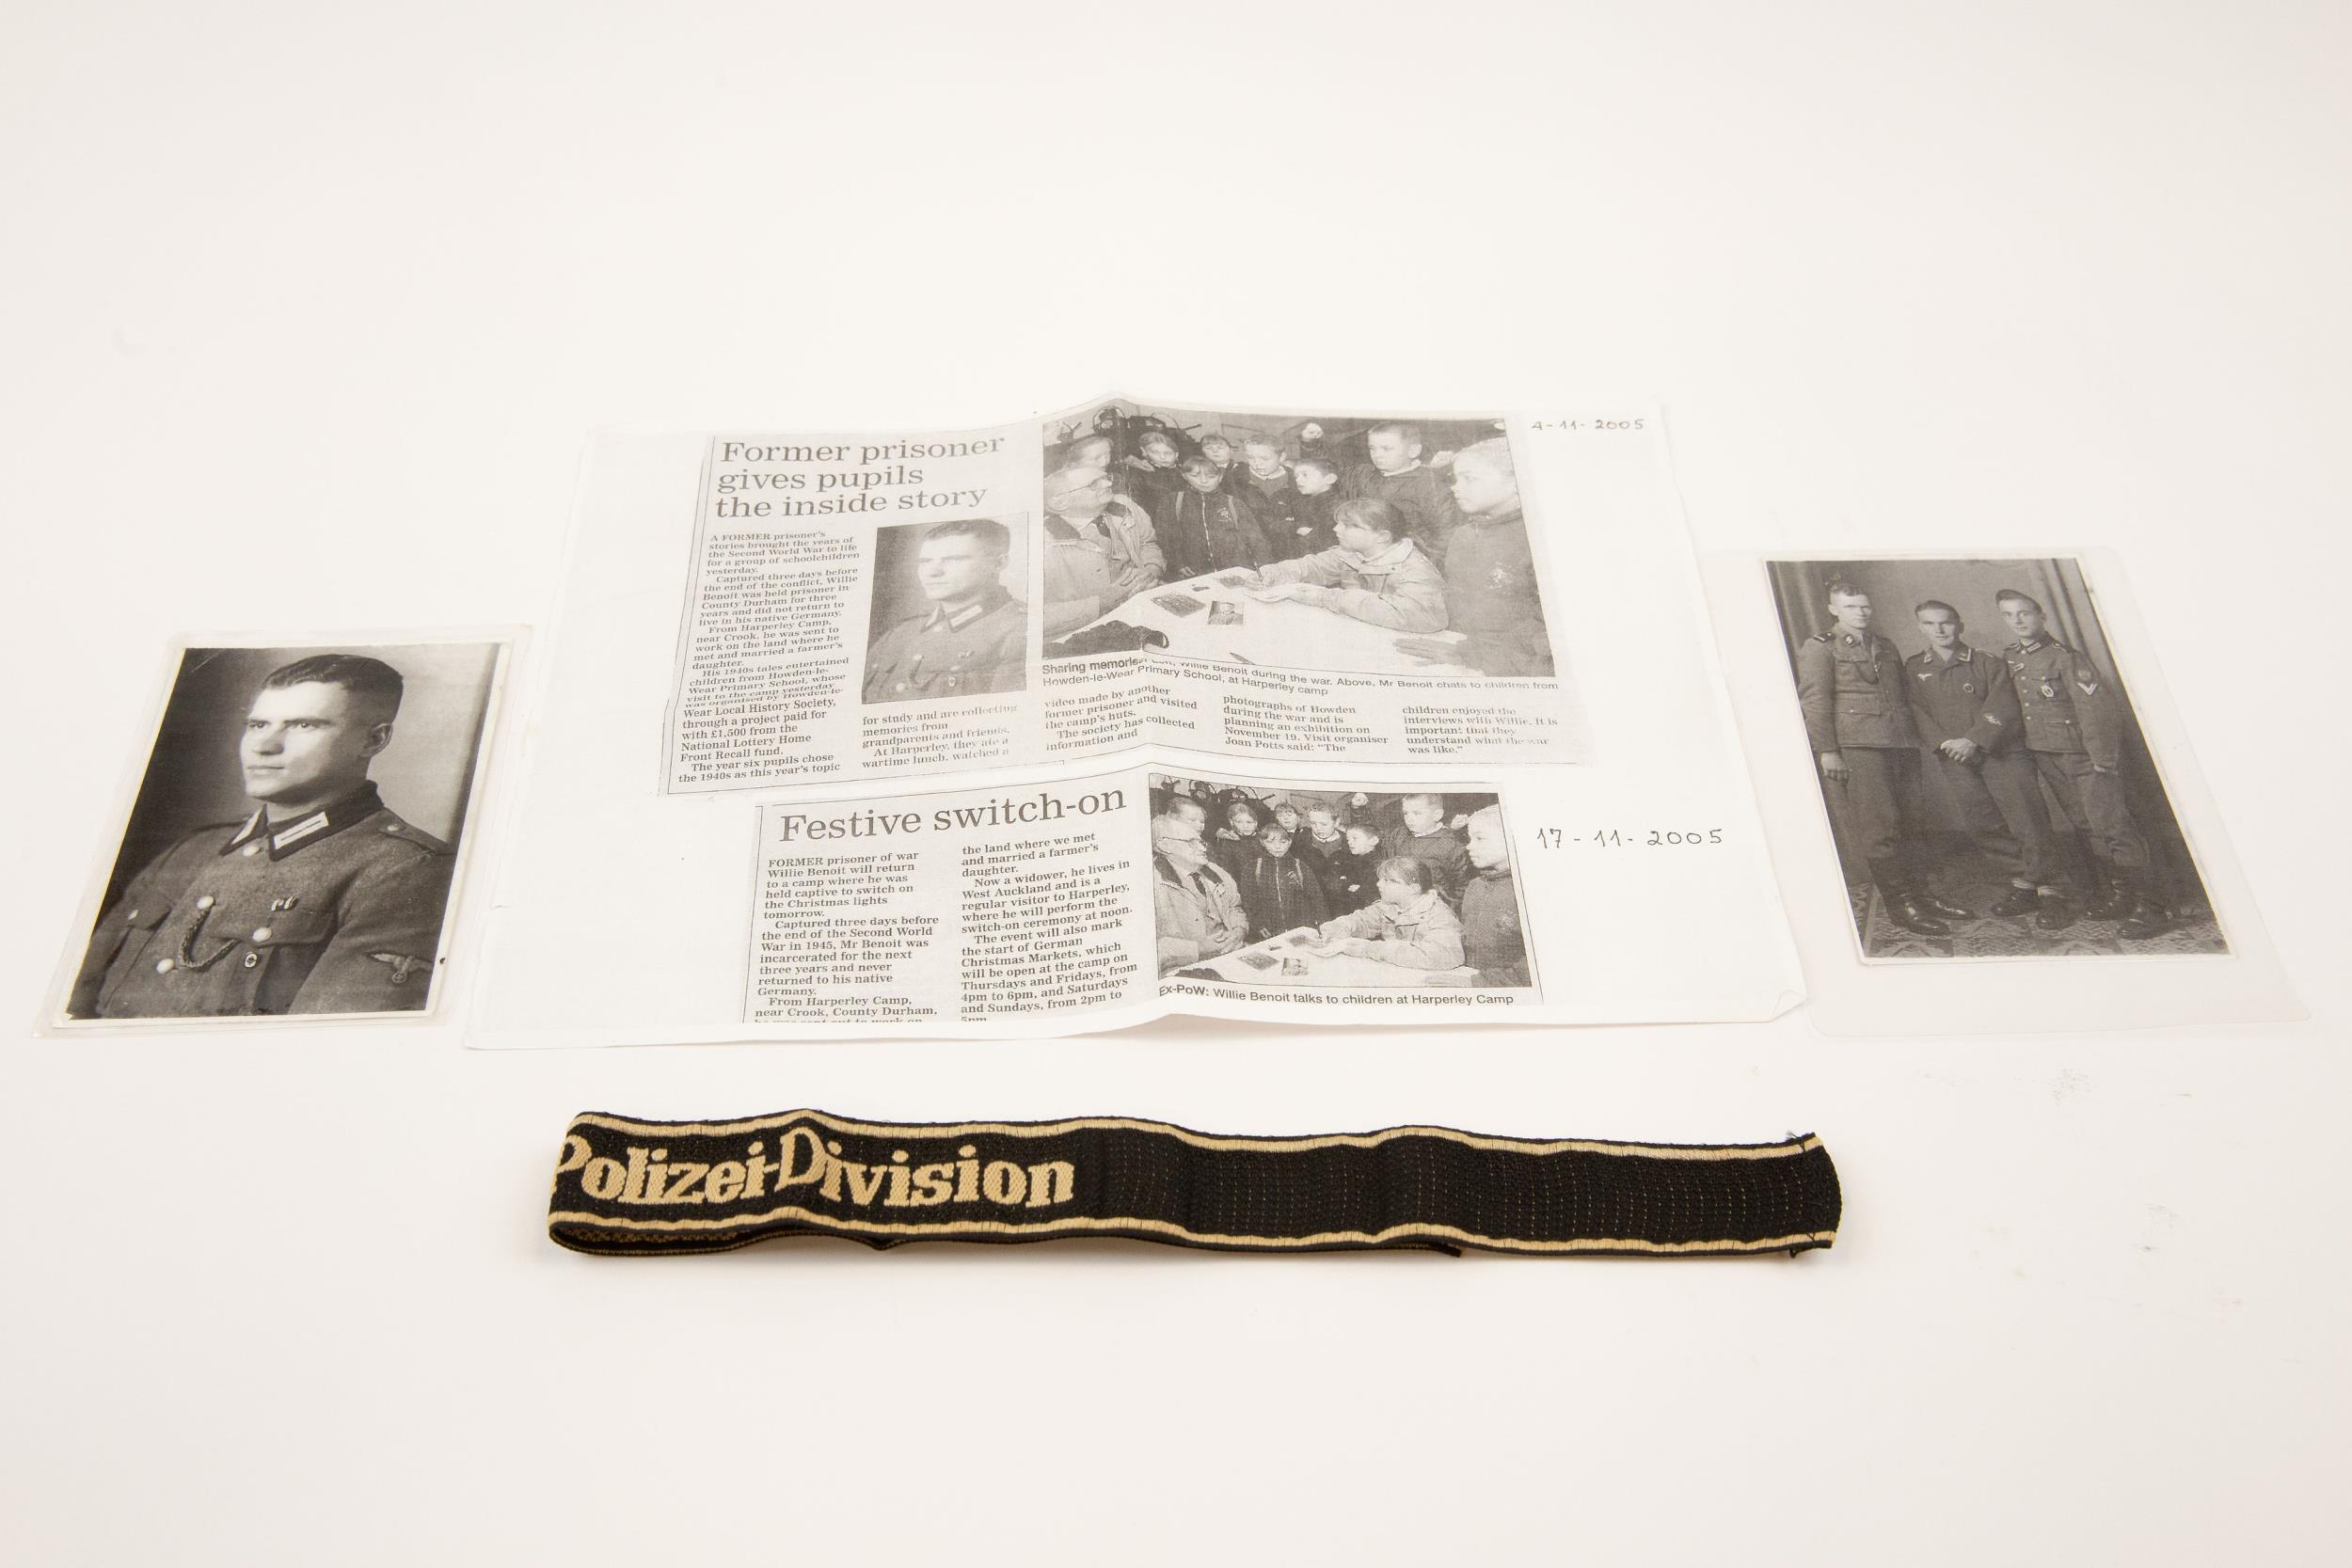 A Third Reich Bevo woven armband of the "SS-Polizei-Division", with the owner's name "W.H. Benoit"